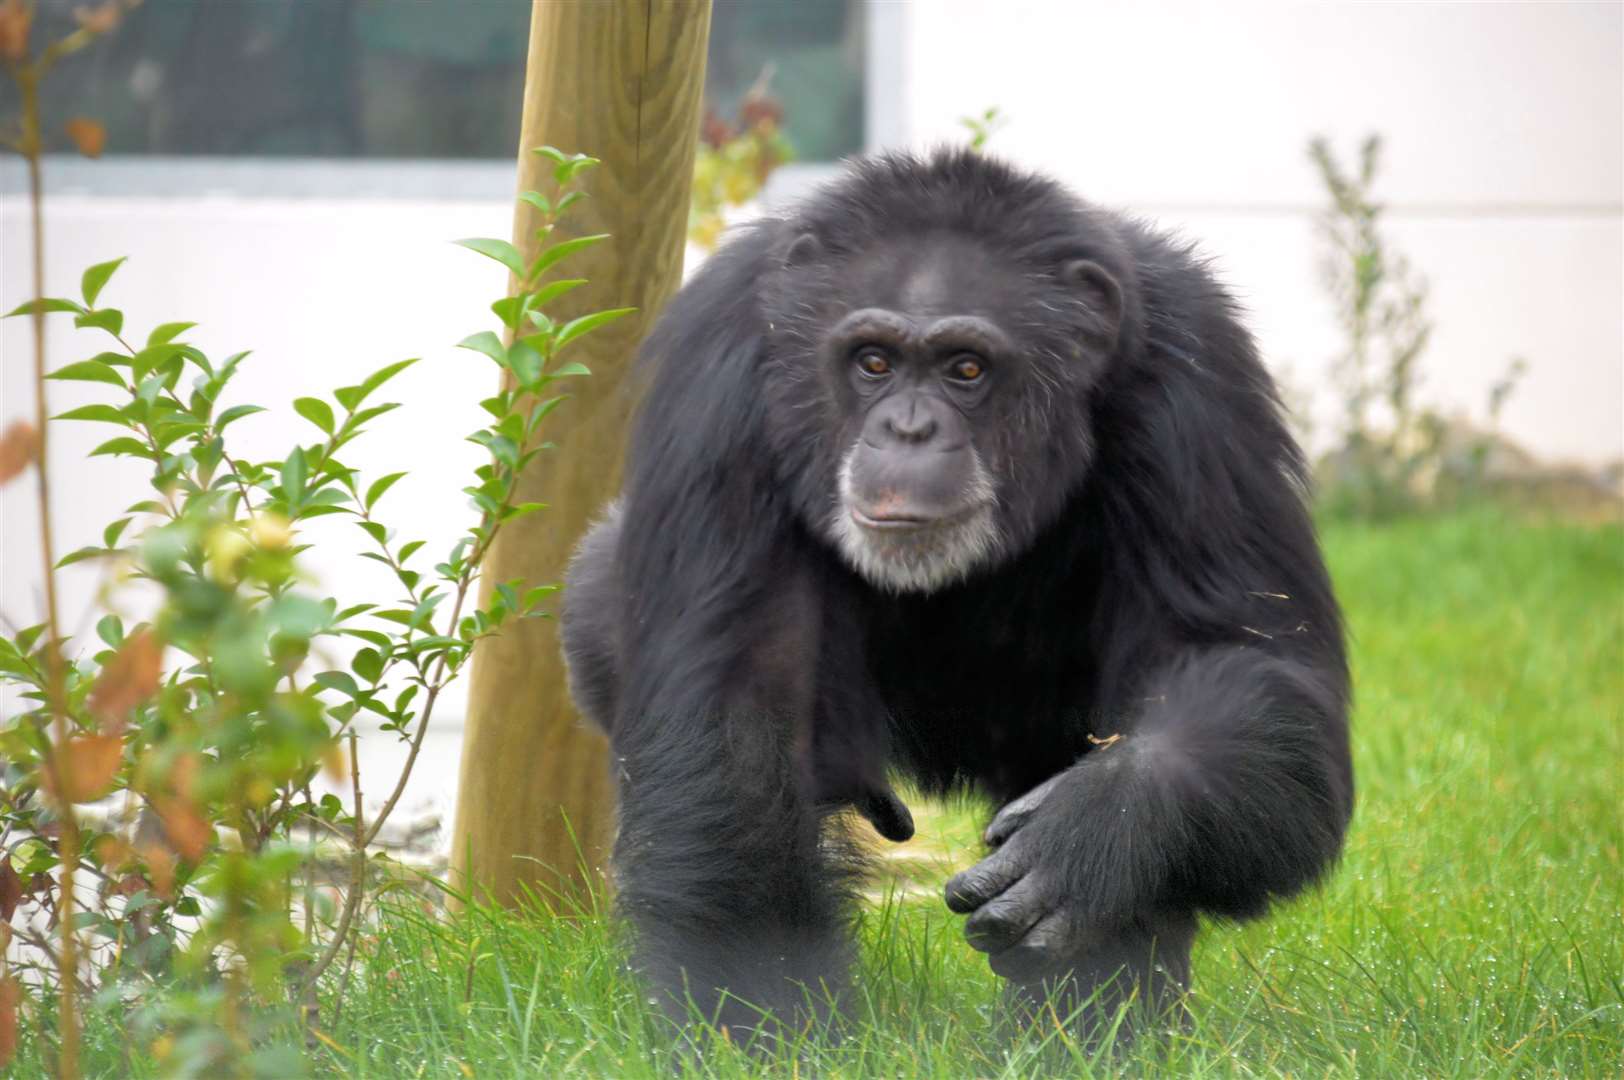 Say hello to the chimps at Wingham Wildlife Park